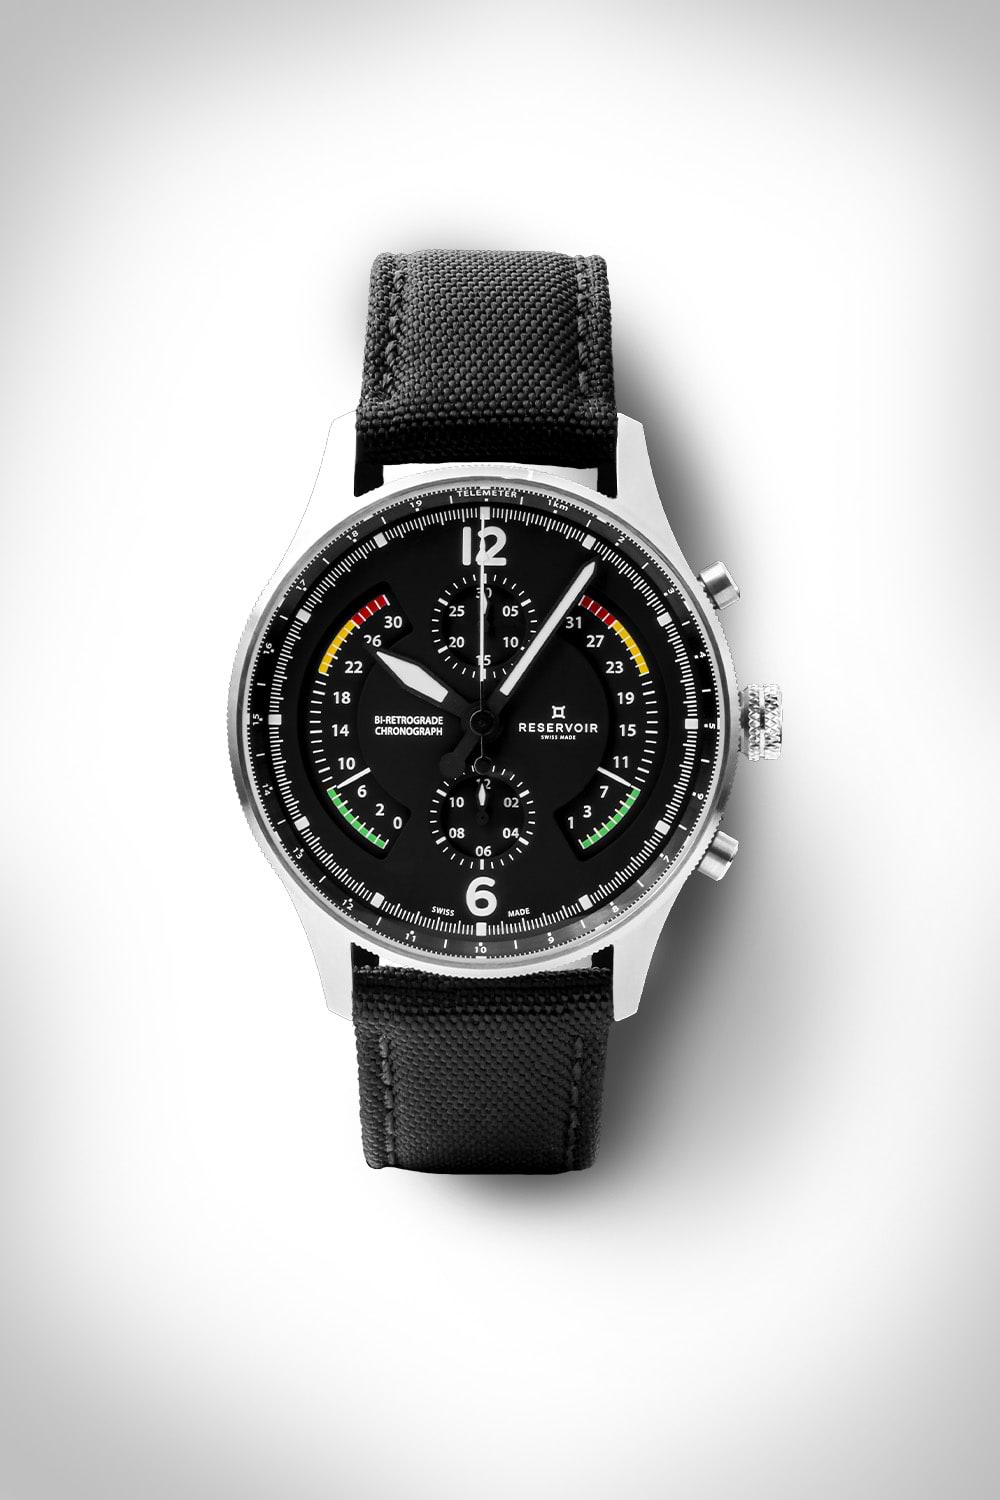 Black wristwatch with a fabric strap, silver case, and colored accents on the dial and sub-dials.